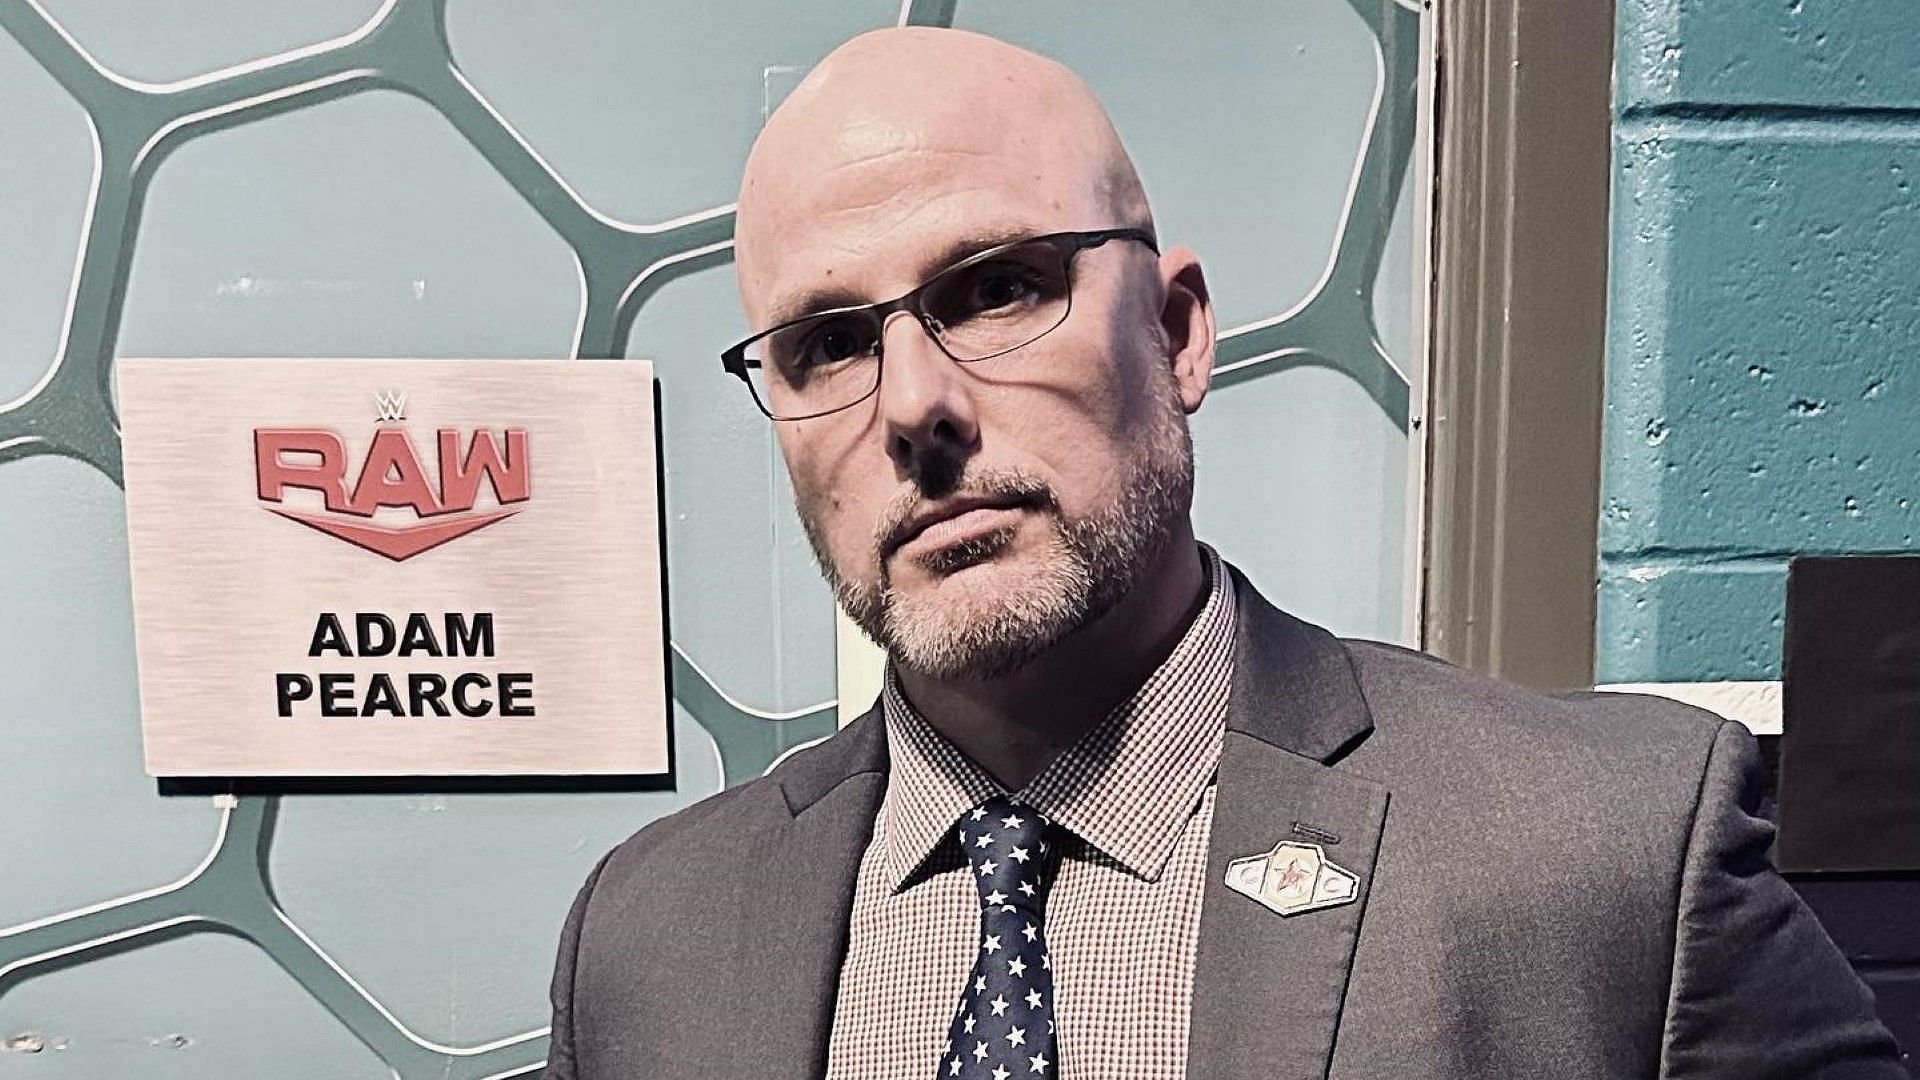 WWE RAW General Manager Adam Pearce in front of his backstage office